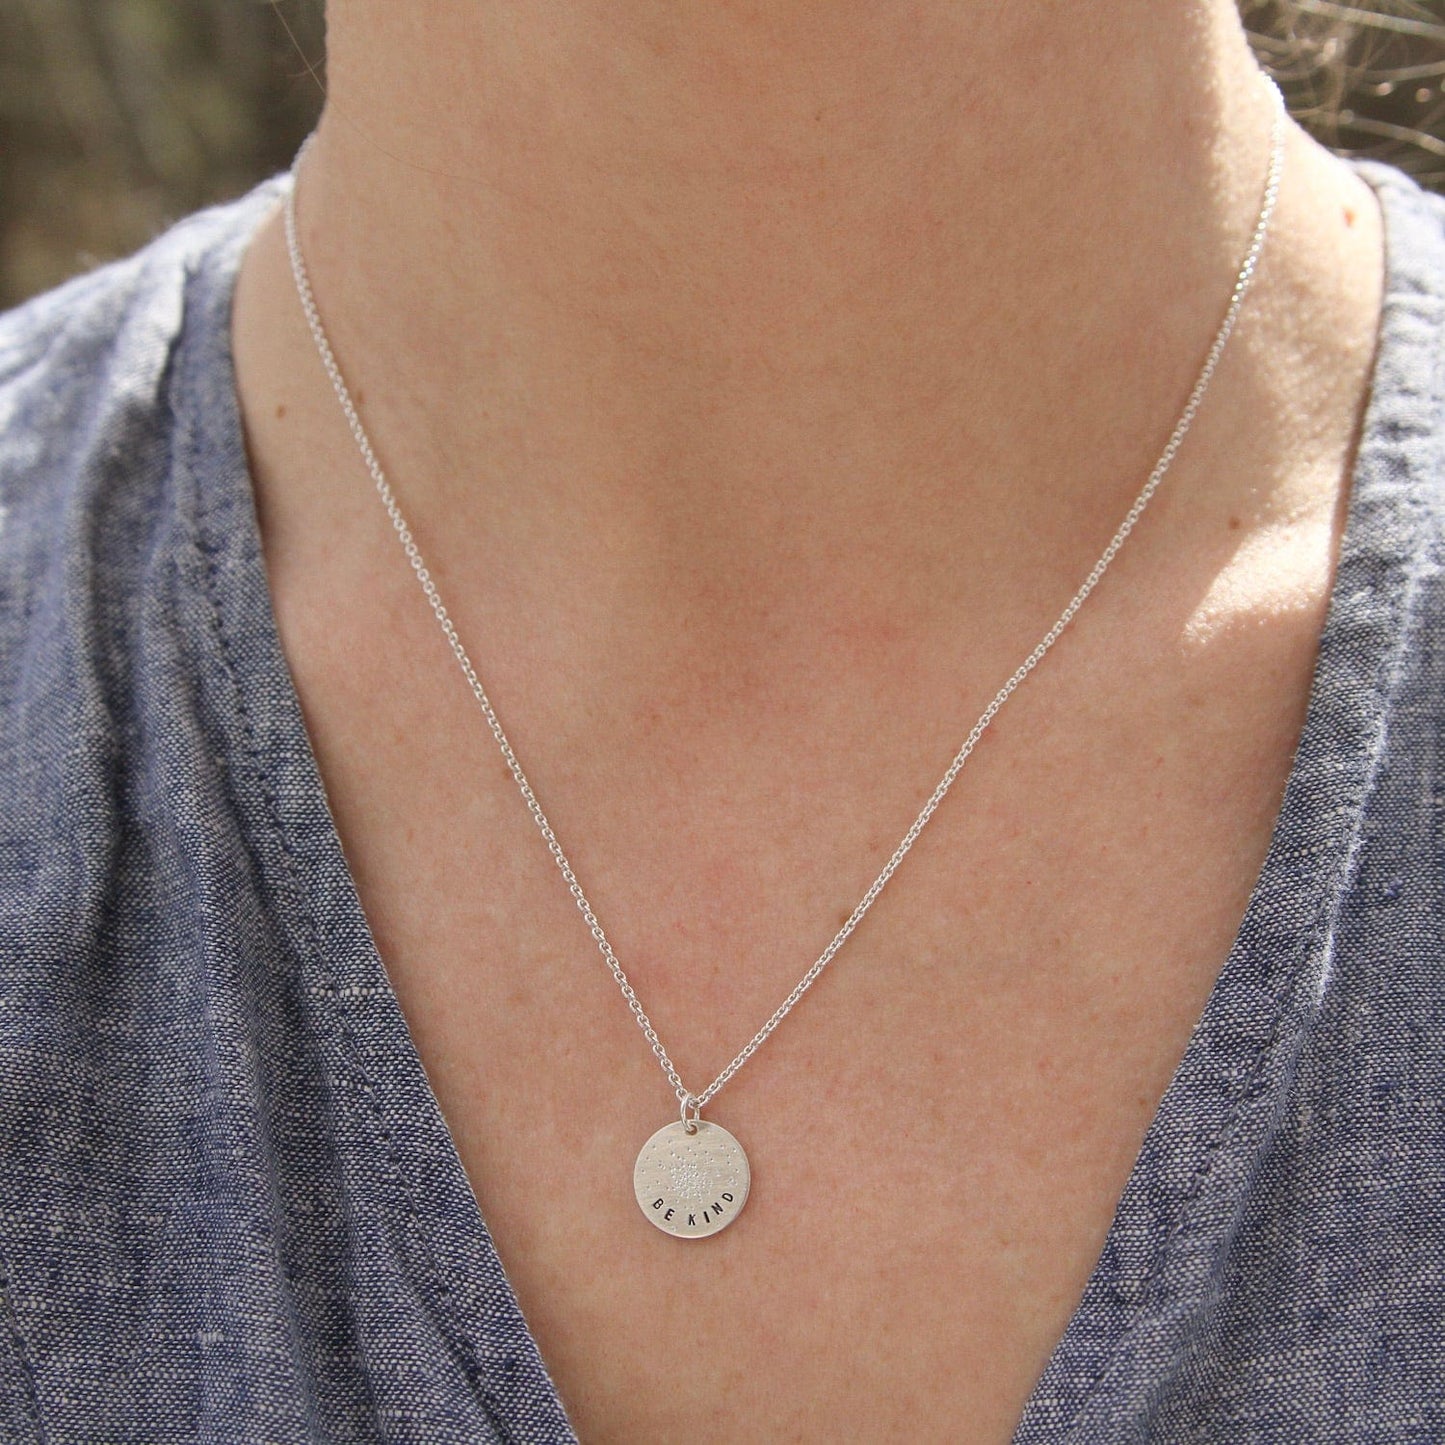 NKL Diamond Dusted Mini Coin Necklace - "Be Kind"